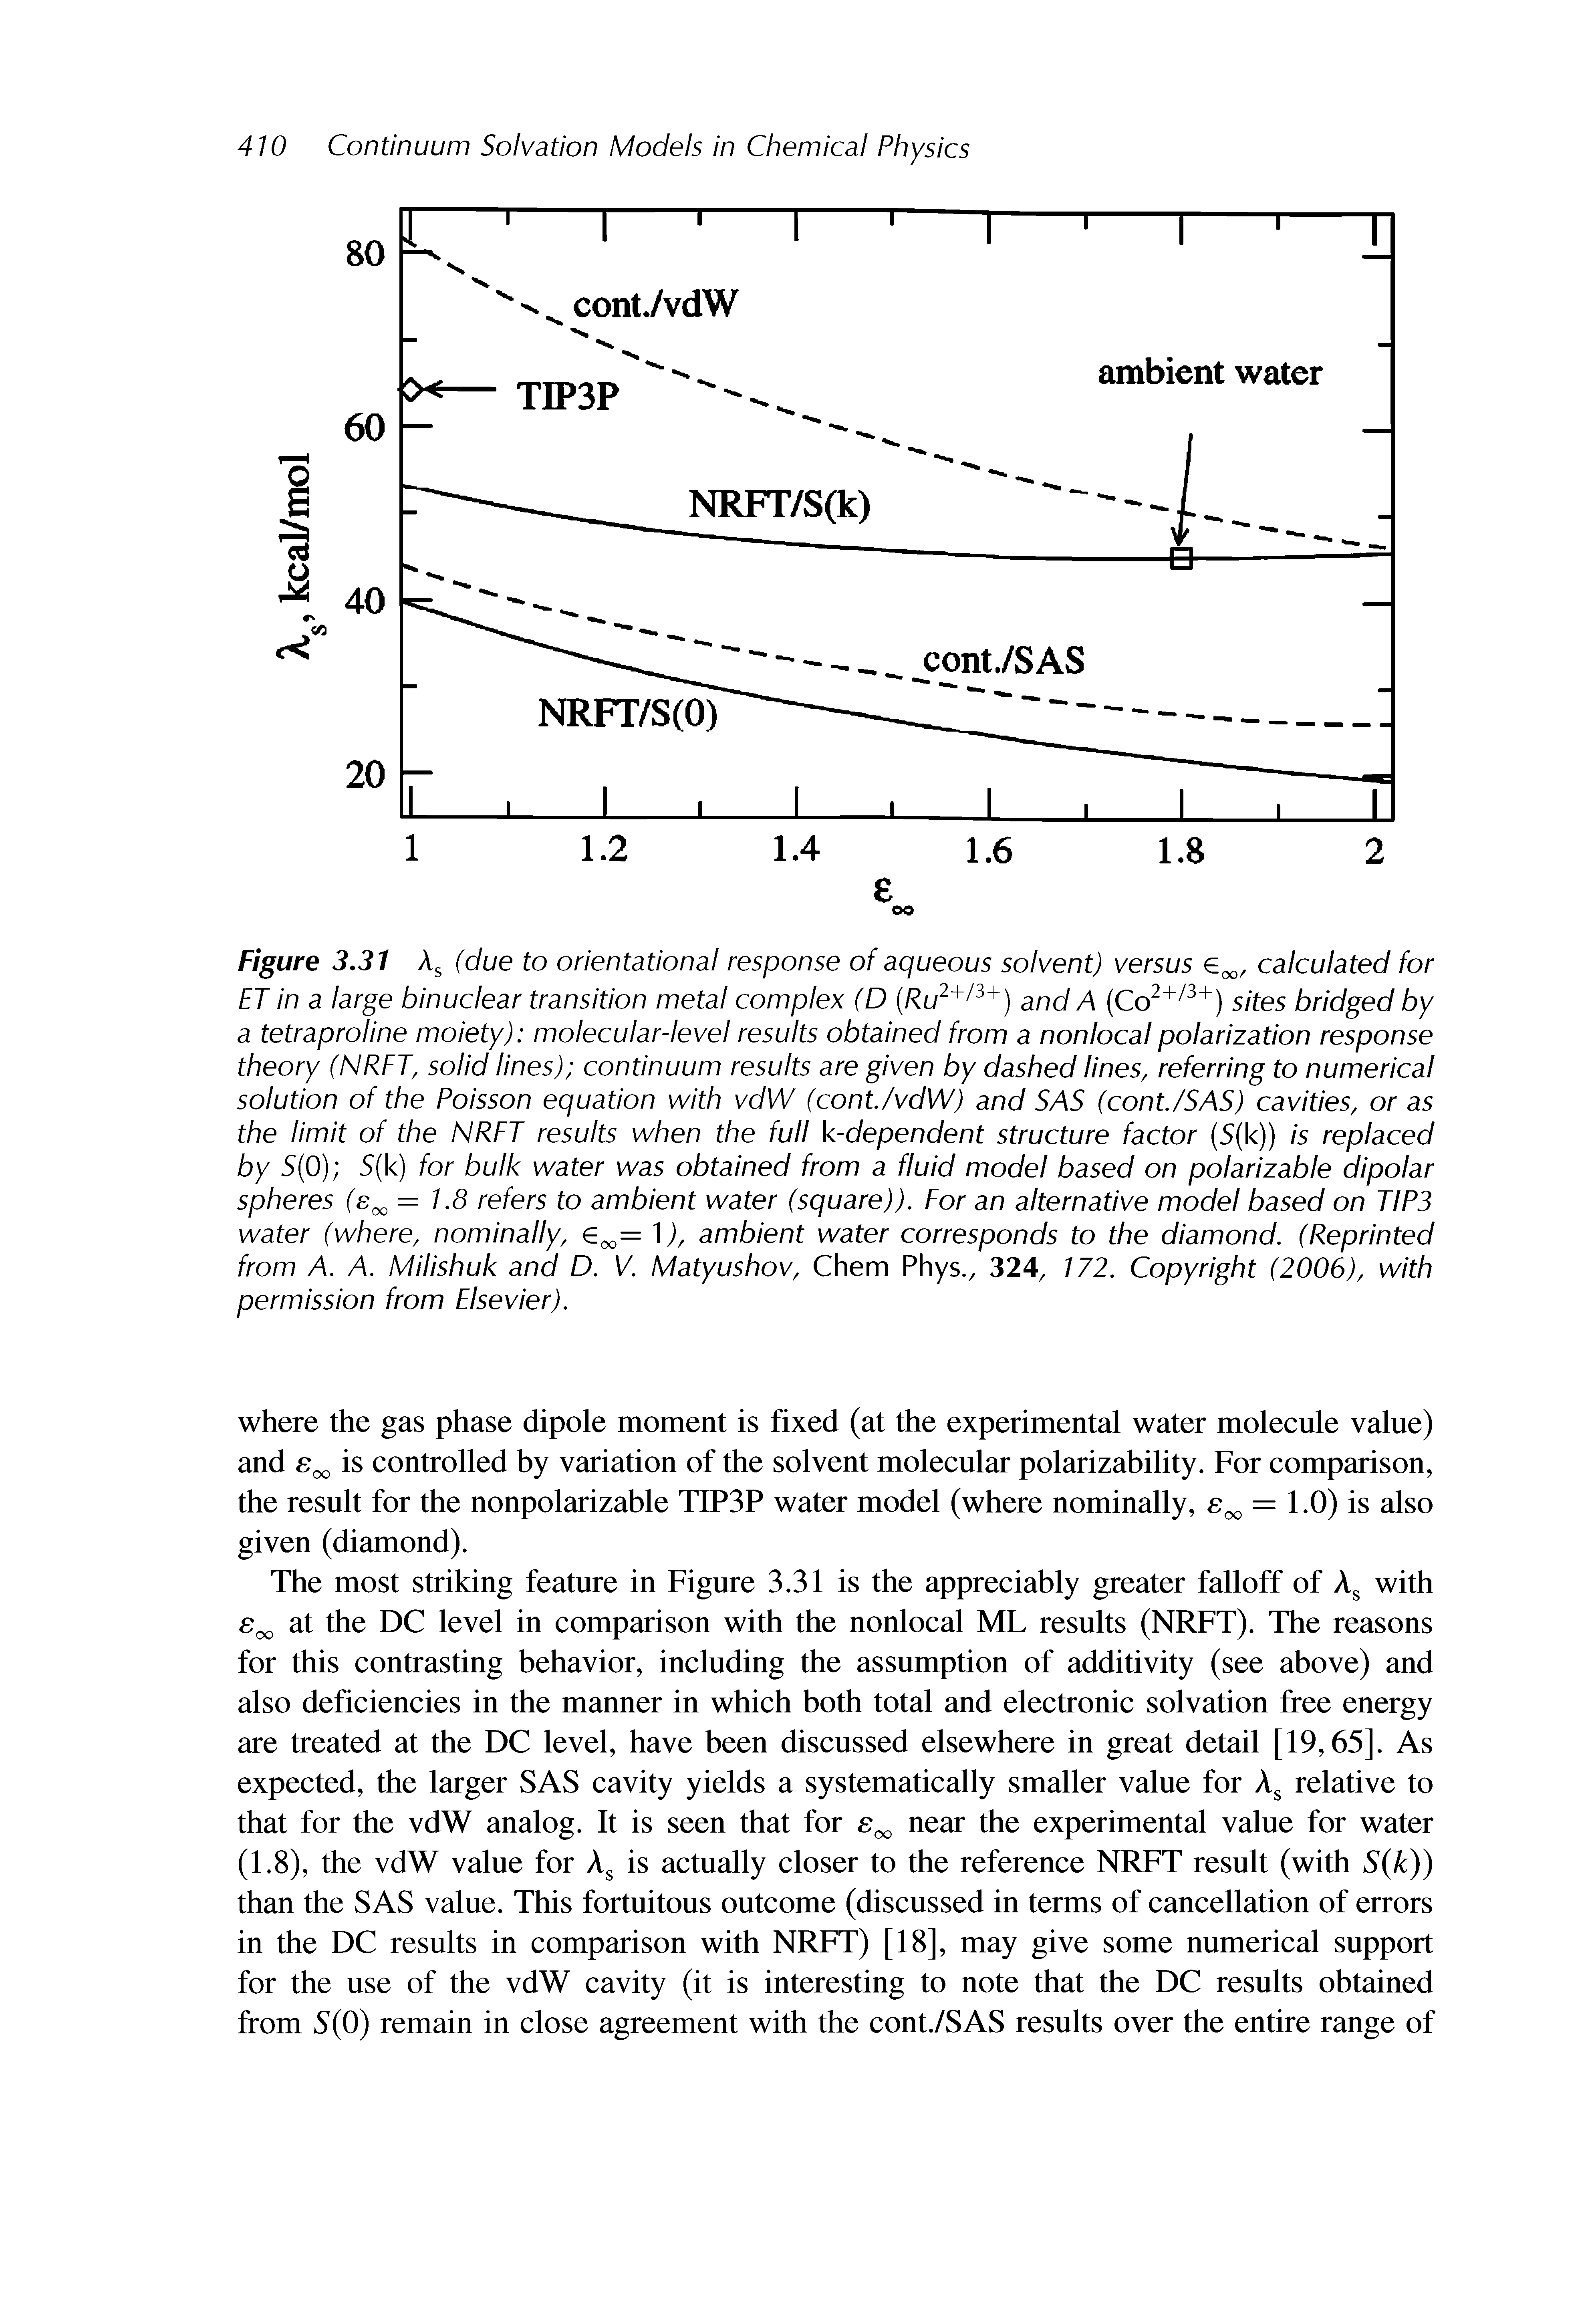 Figure 3.31 As (due to orientational response of aqueous solvent) versus e, calculated for ET in a large binuclear transition metal complex (D (Ru2+/3+) and A (Co2+/3+) sites bridged by a tetraproline moiety) molecular-level results obtained from a nonlocal polarization response theory (NRFT, solid lines) continuum results are given by dashed lines, referring to numerical solution of the Poisson equation with vdW (cont./vdW) and SAS (cont./SAS) cavities, or as the limit of the NRFT results when the full k-dependent structure factor (5(k)) is replaced by 5(0) 5(k) for bulk water was obtained from a fluid model based on polarizable dipolar spheres (s = 1.8 refers to ambient water (square)). For an alternative model based on TIP3 water (where, nominally, 6 = ), ambient water corresponds to the diamond. (Reprinted from A. A. Milishuk and D. V. Matyushov, Chem Phys., 324, 172. Copyright (2006), with permission from Elsevier).